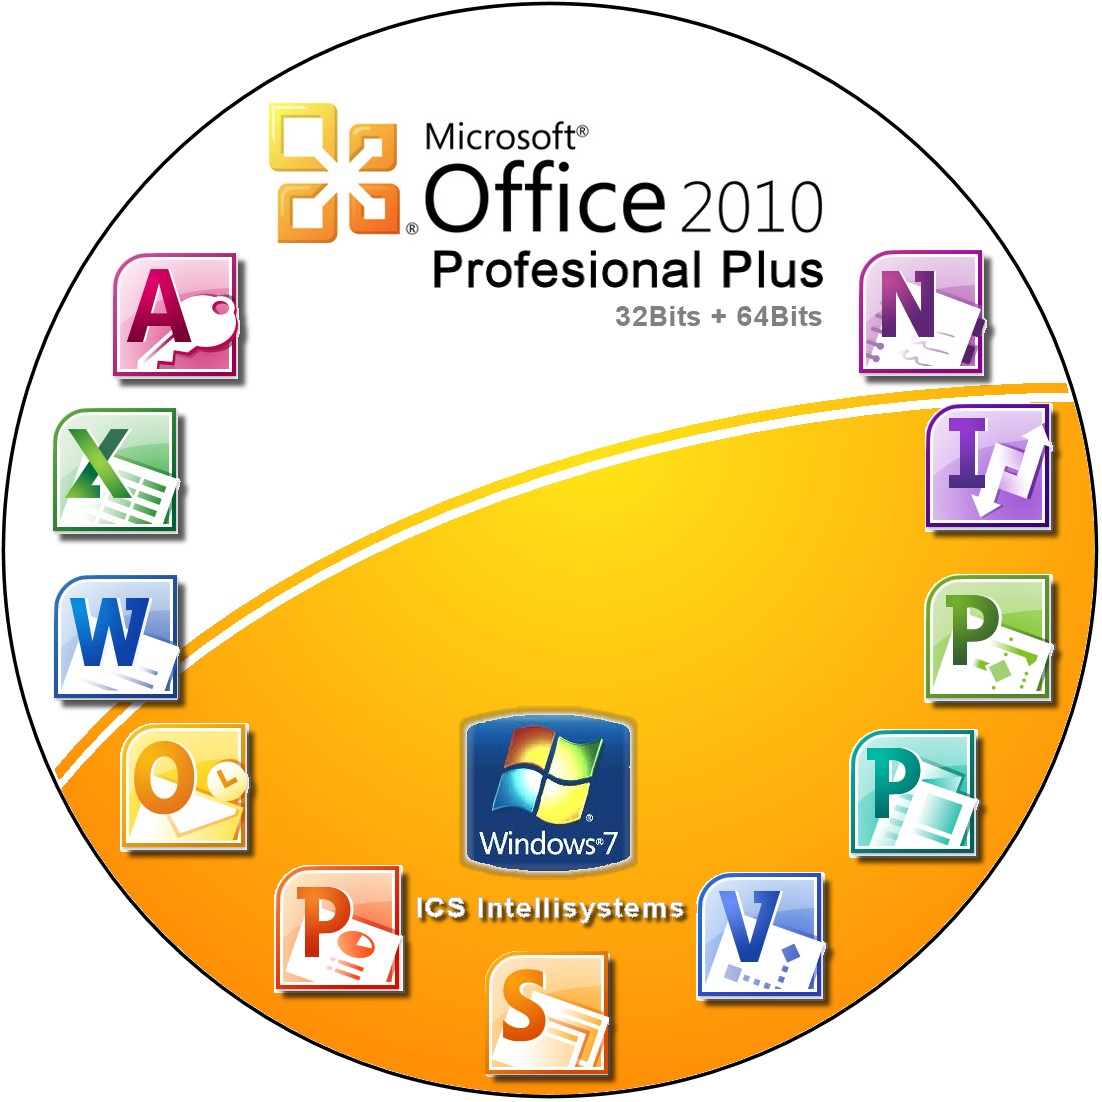 Microsoft Office 2010 Free Download Full Version For Windows 8